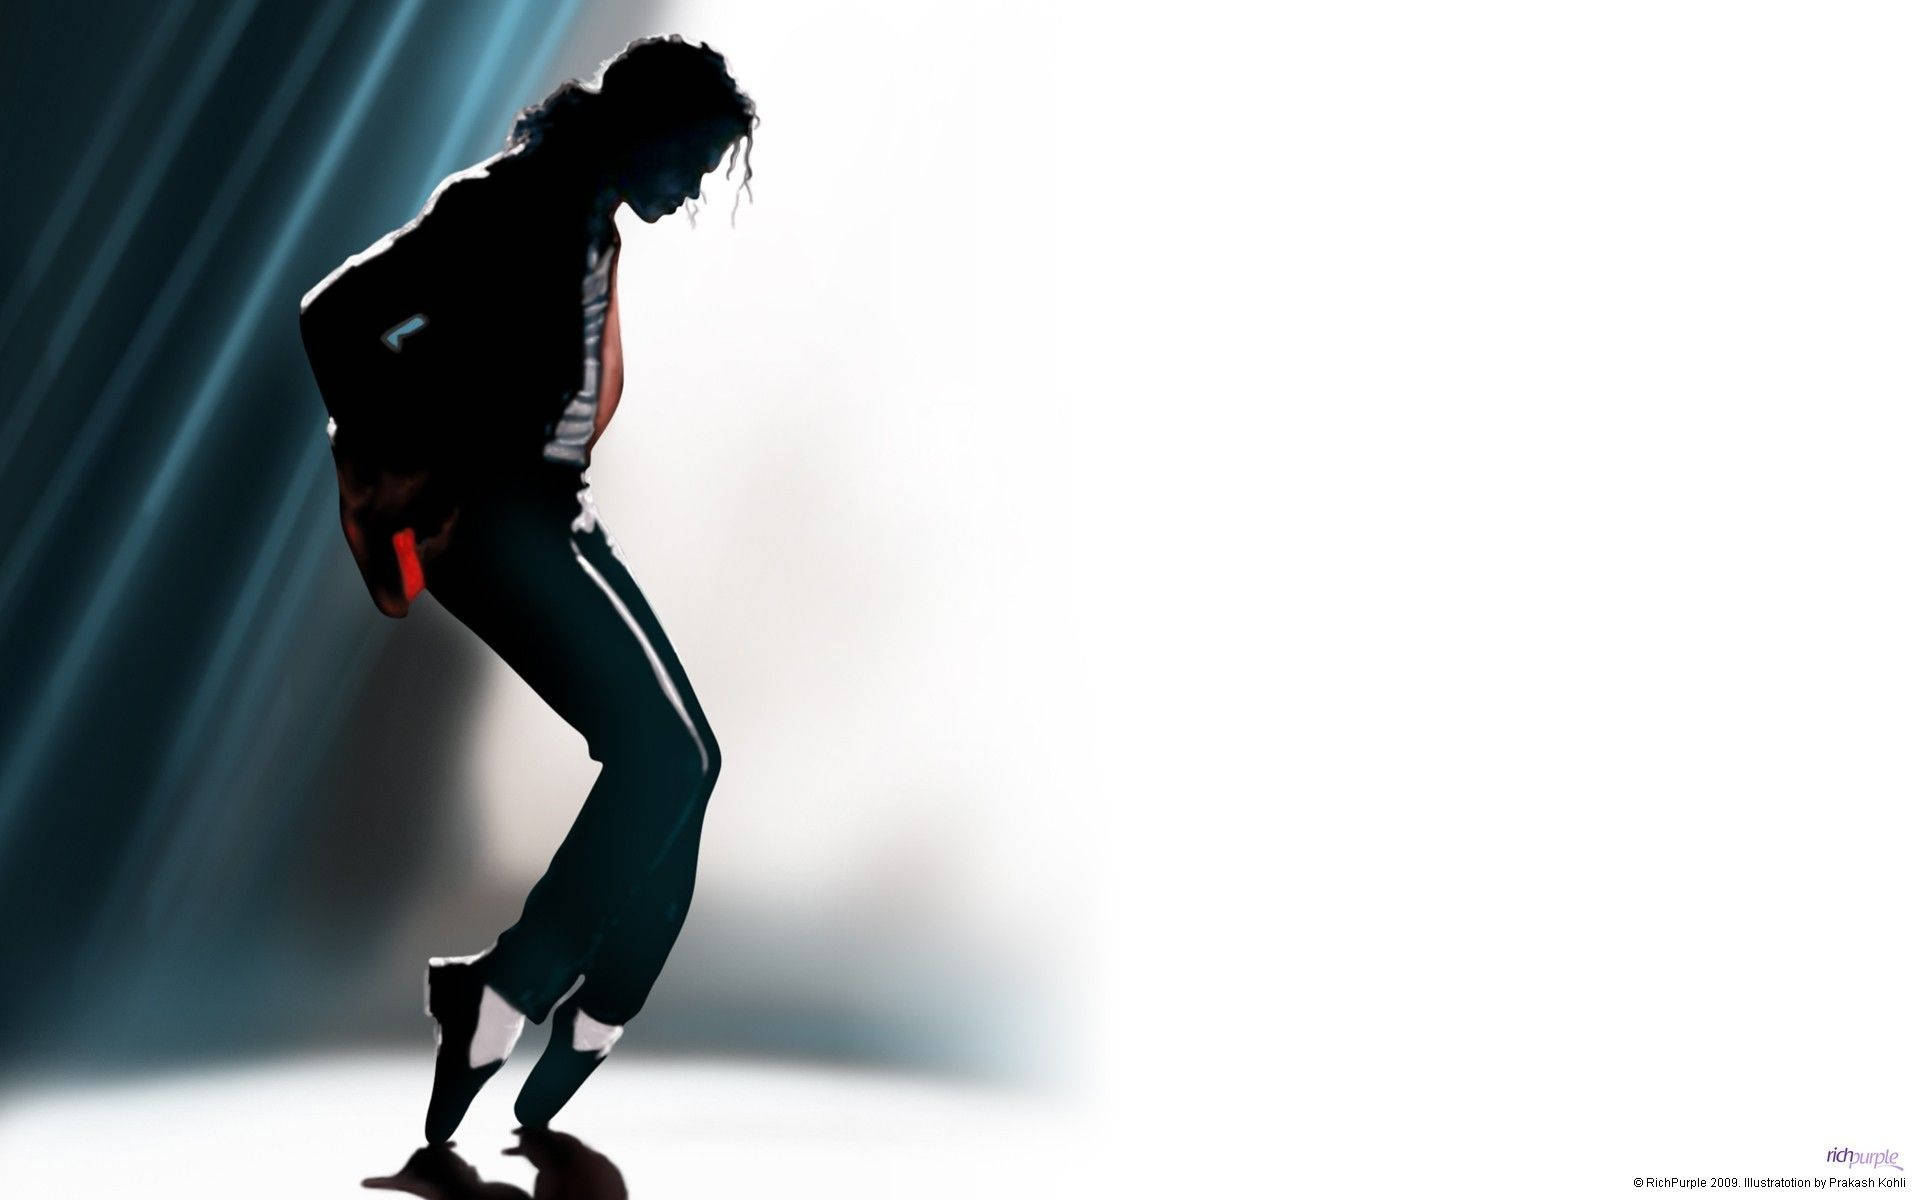 Michael Jackson 1920X1200 Wallpaper and Background Image